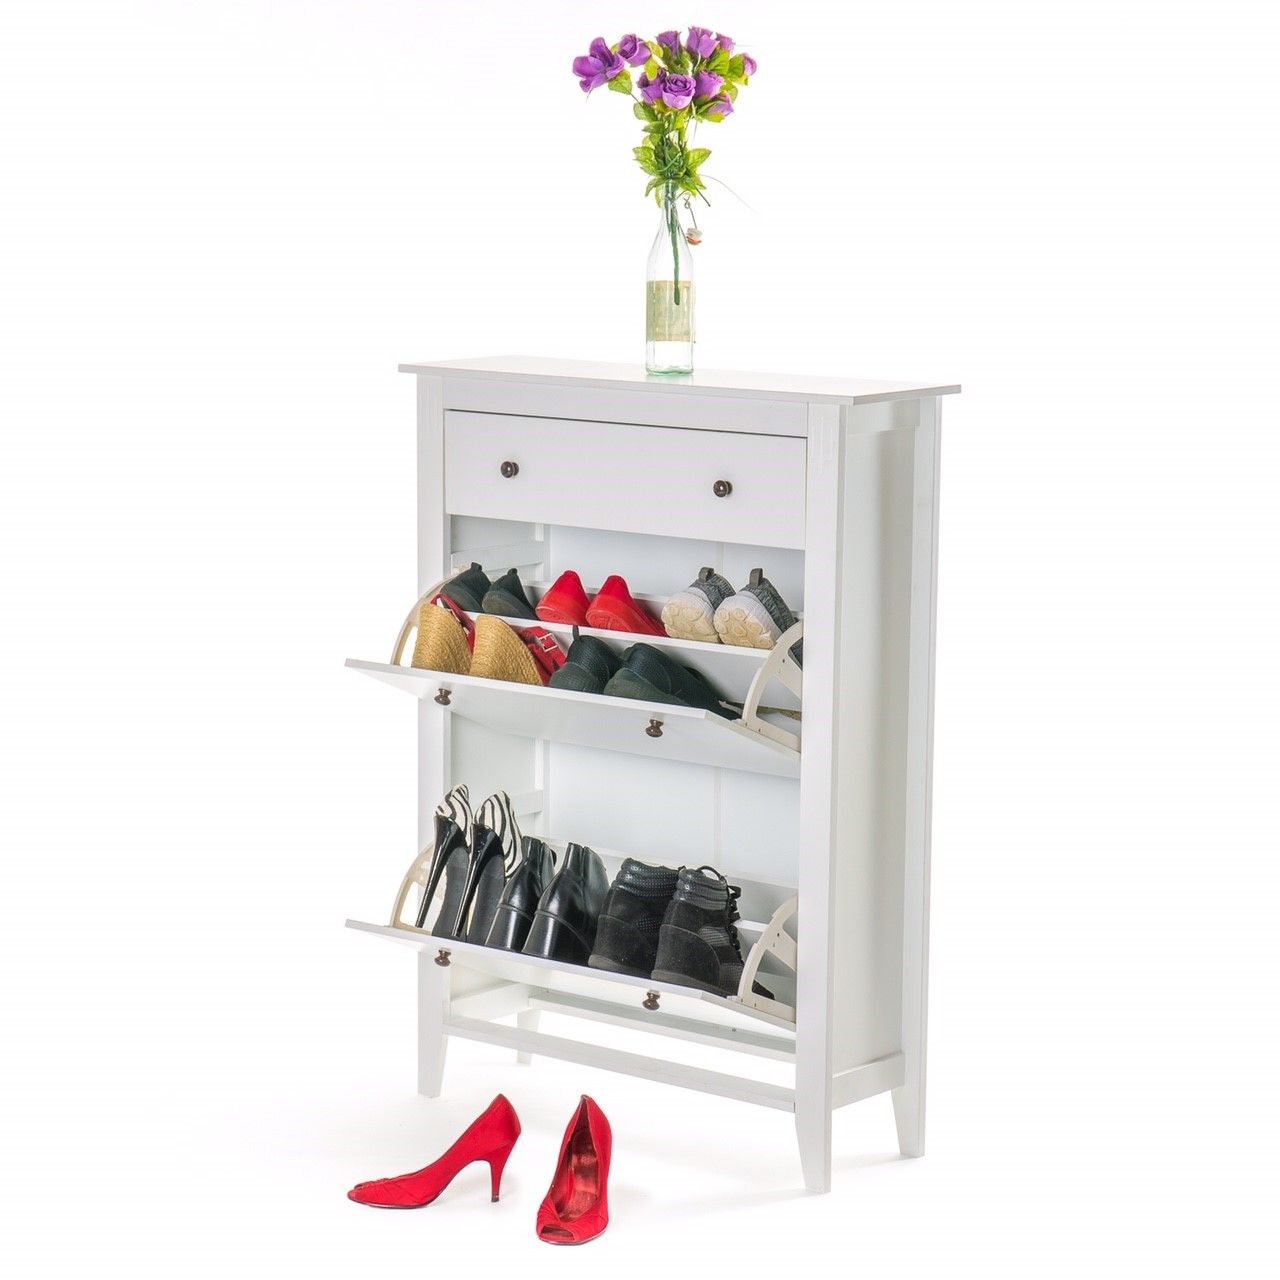 Wooden Shoe Rack Cabinet with Storage Drawer - Home Treats UK